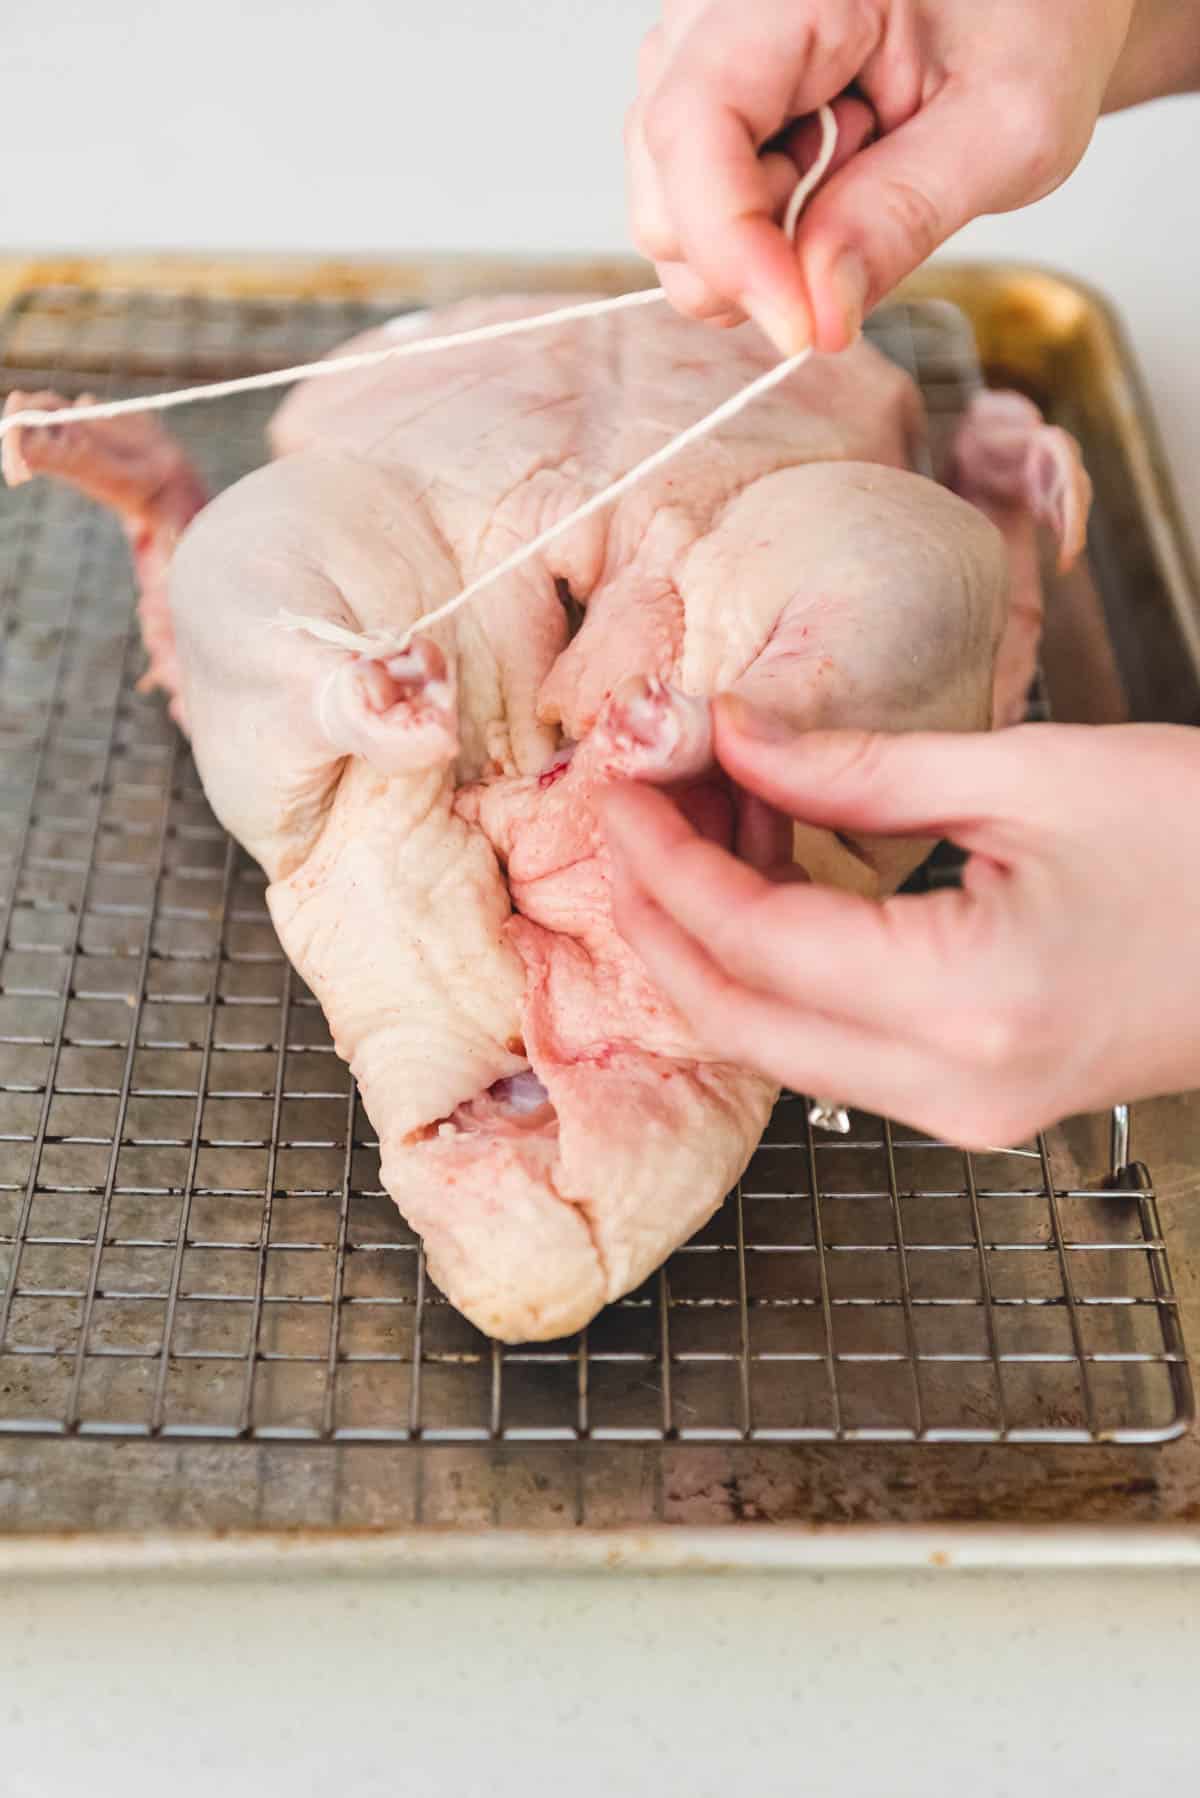 An image showing a whole duck being trussed for roasting in the oven.